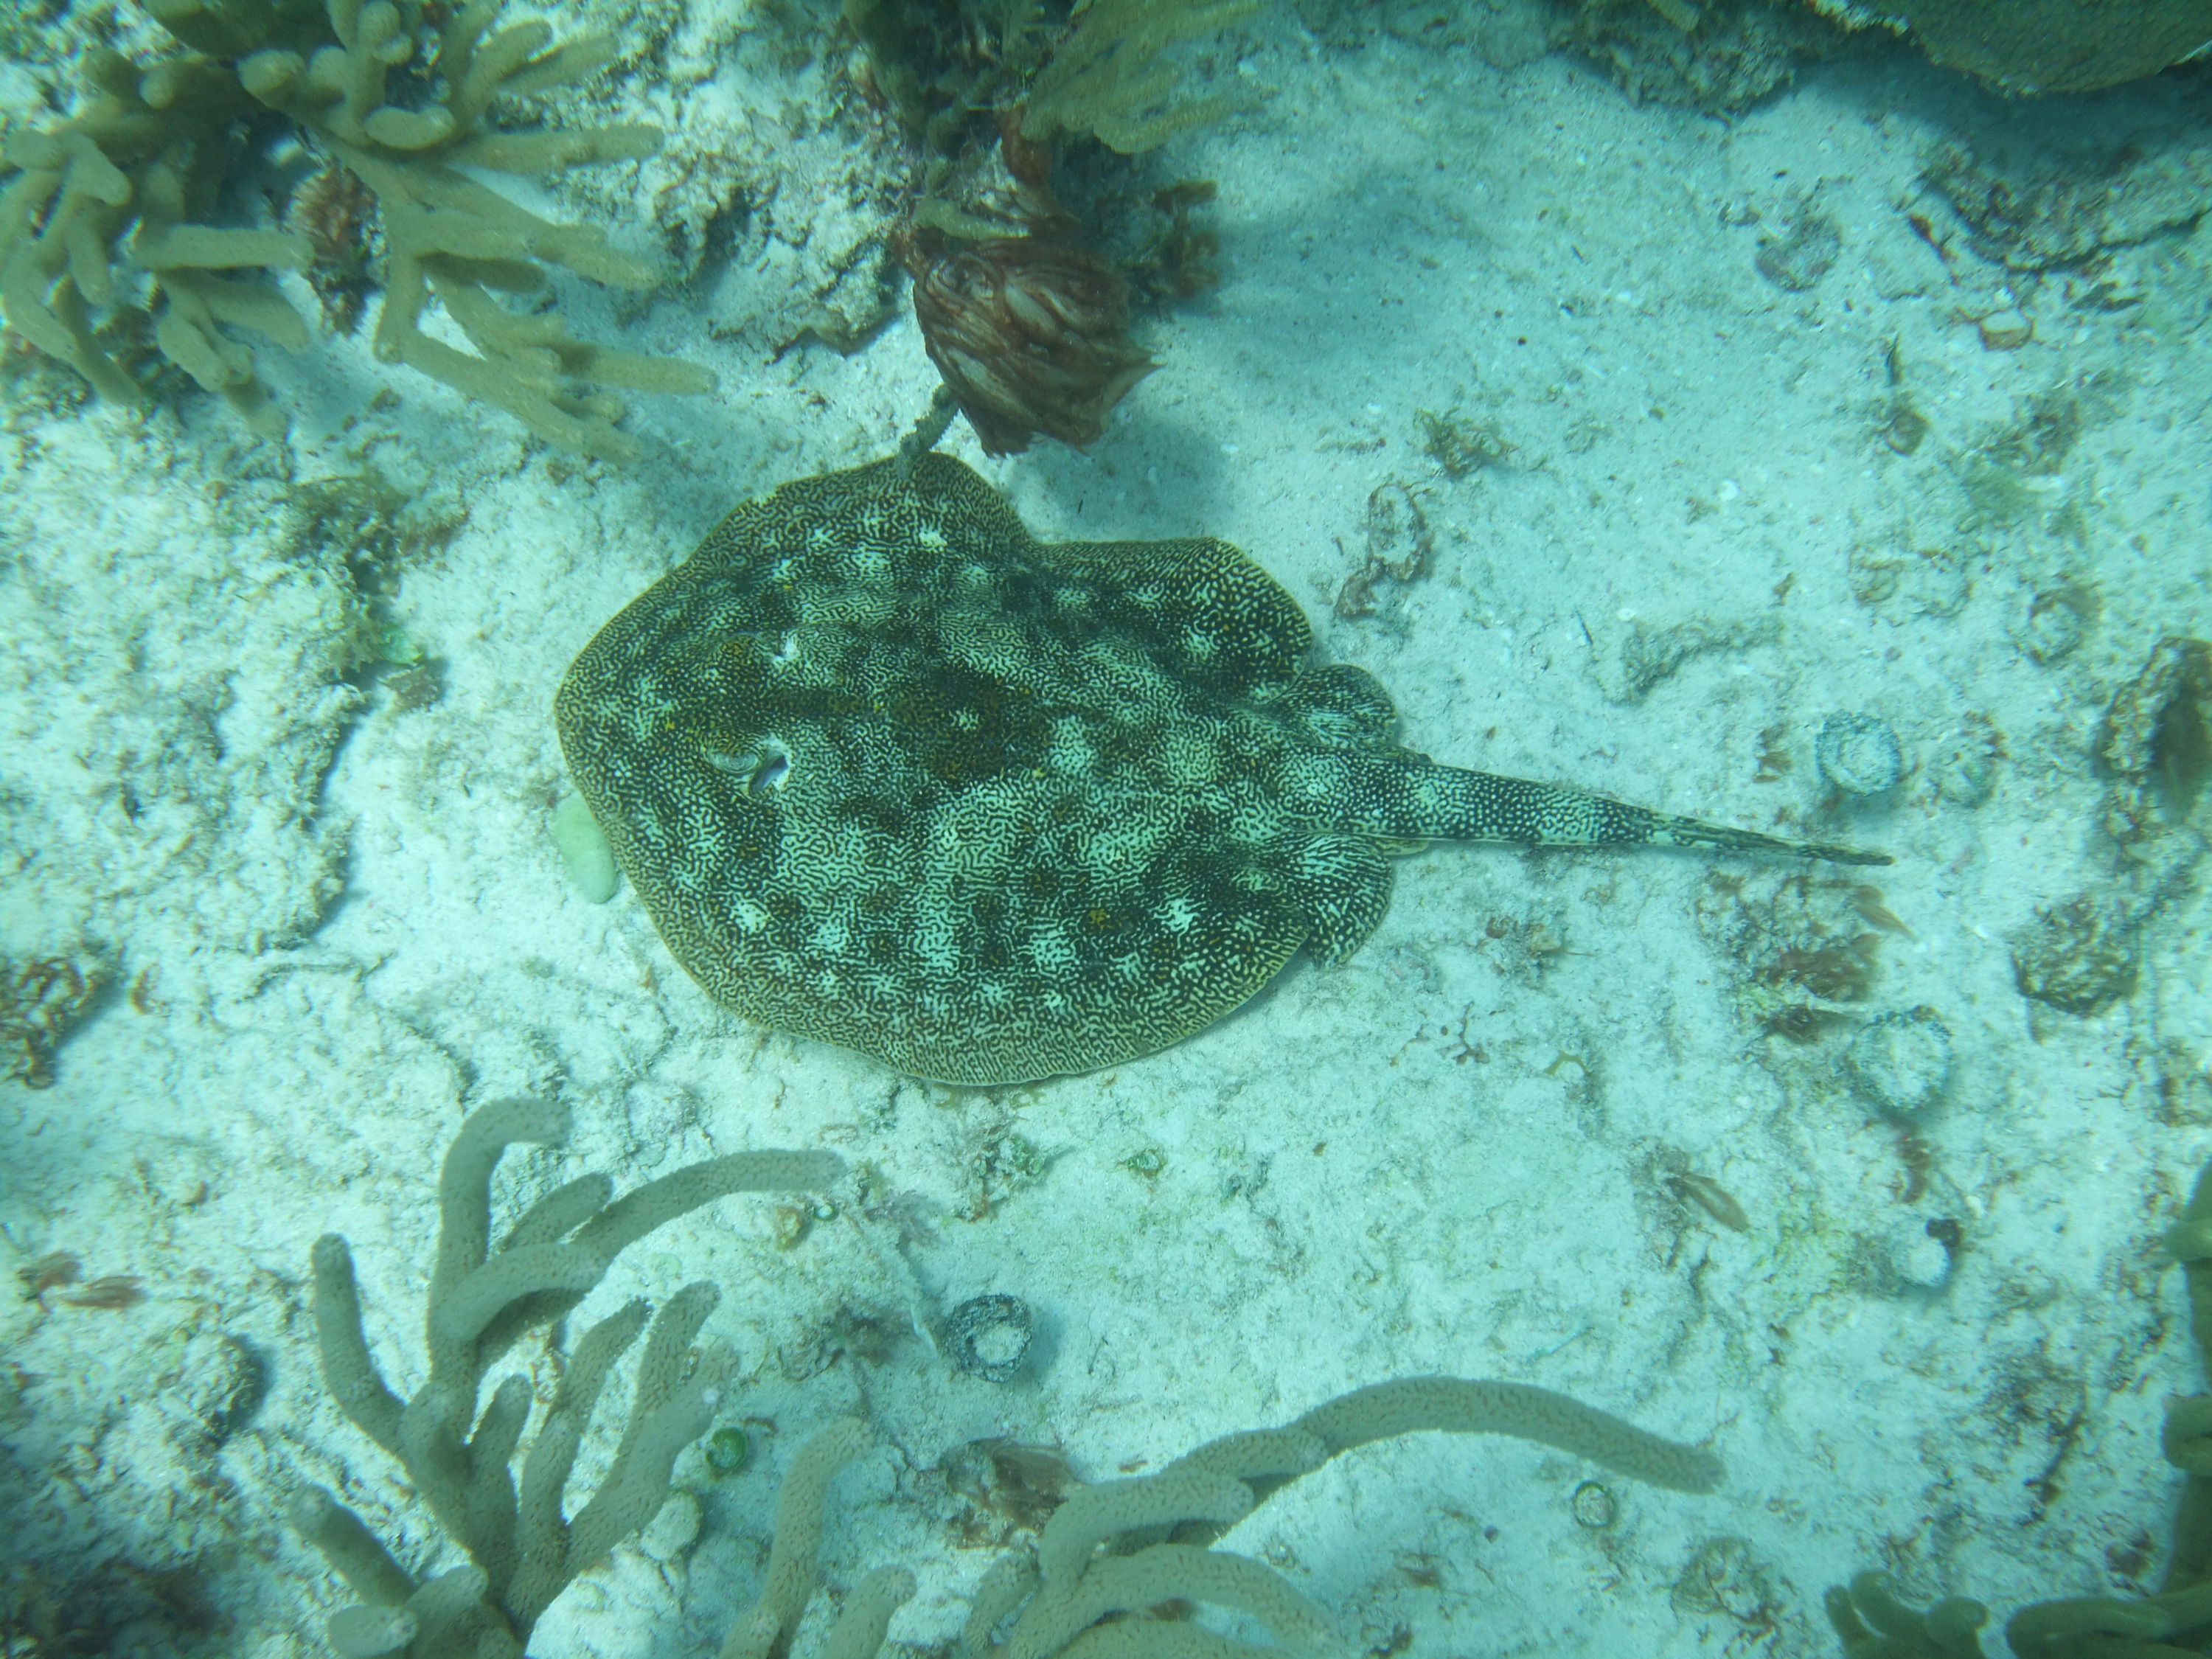 Spotted Ray - Cancun, Mexico